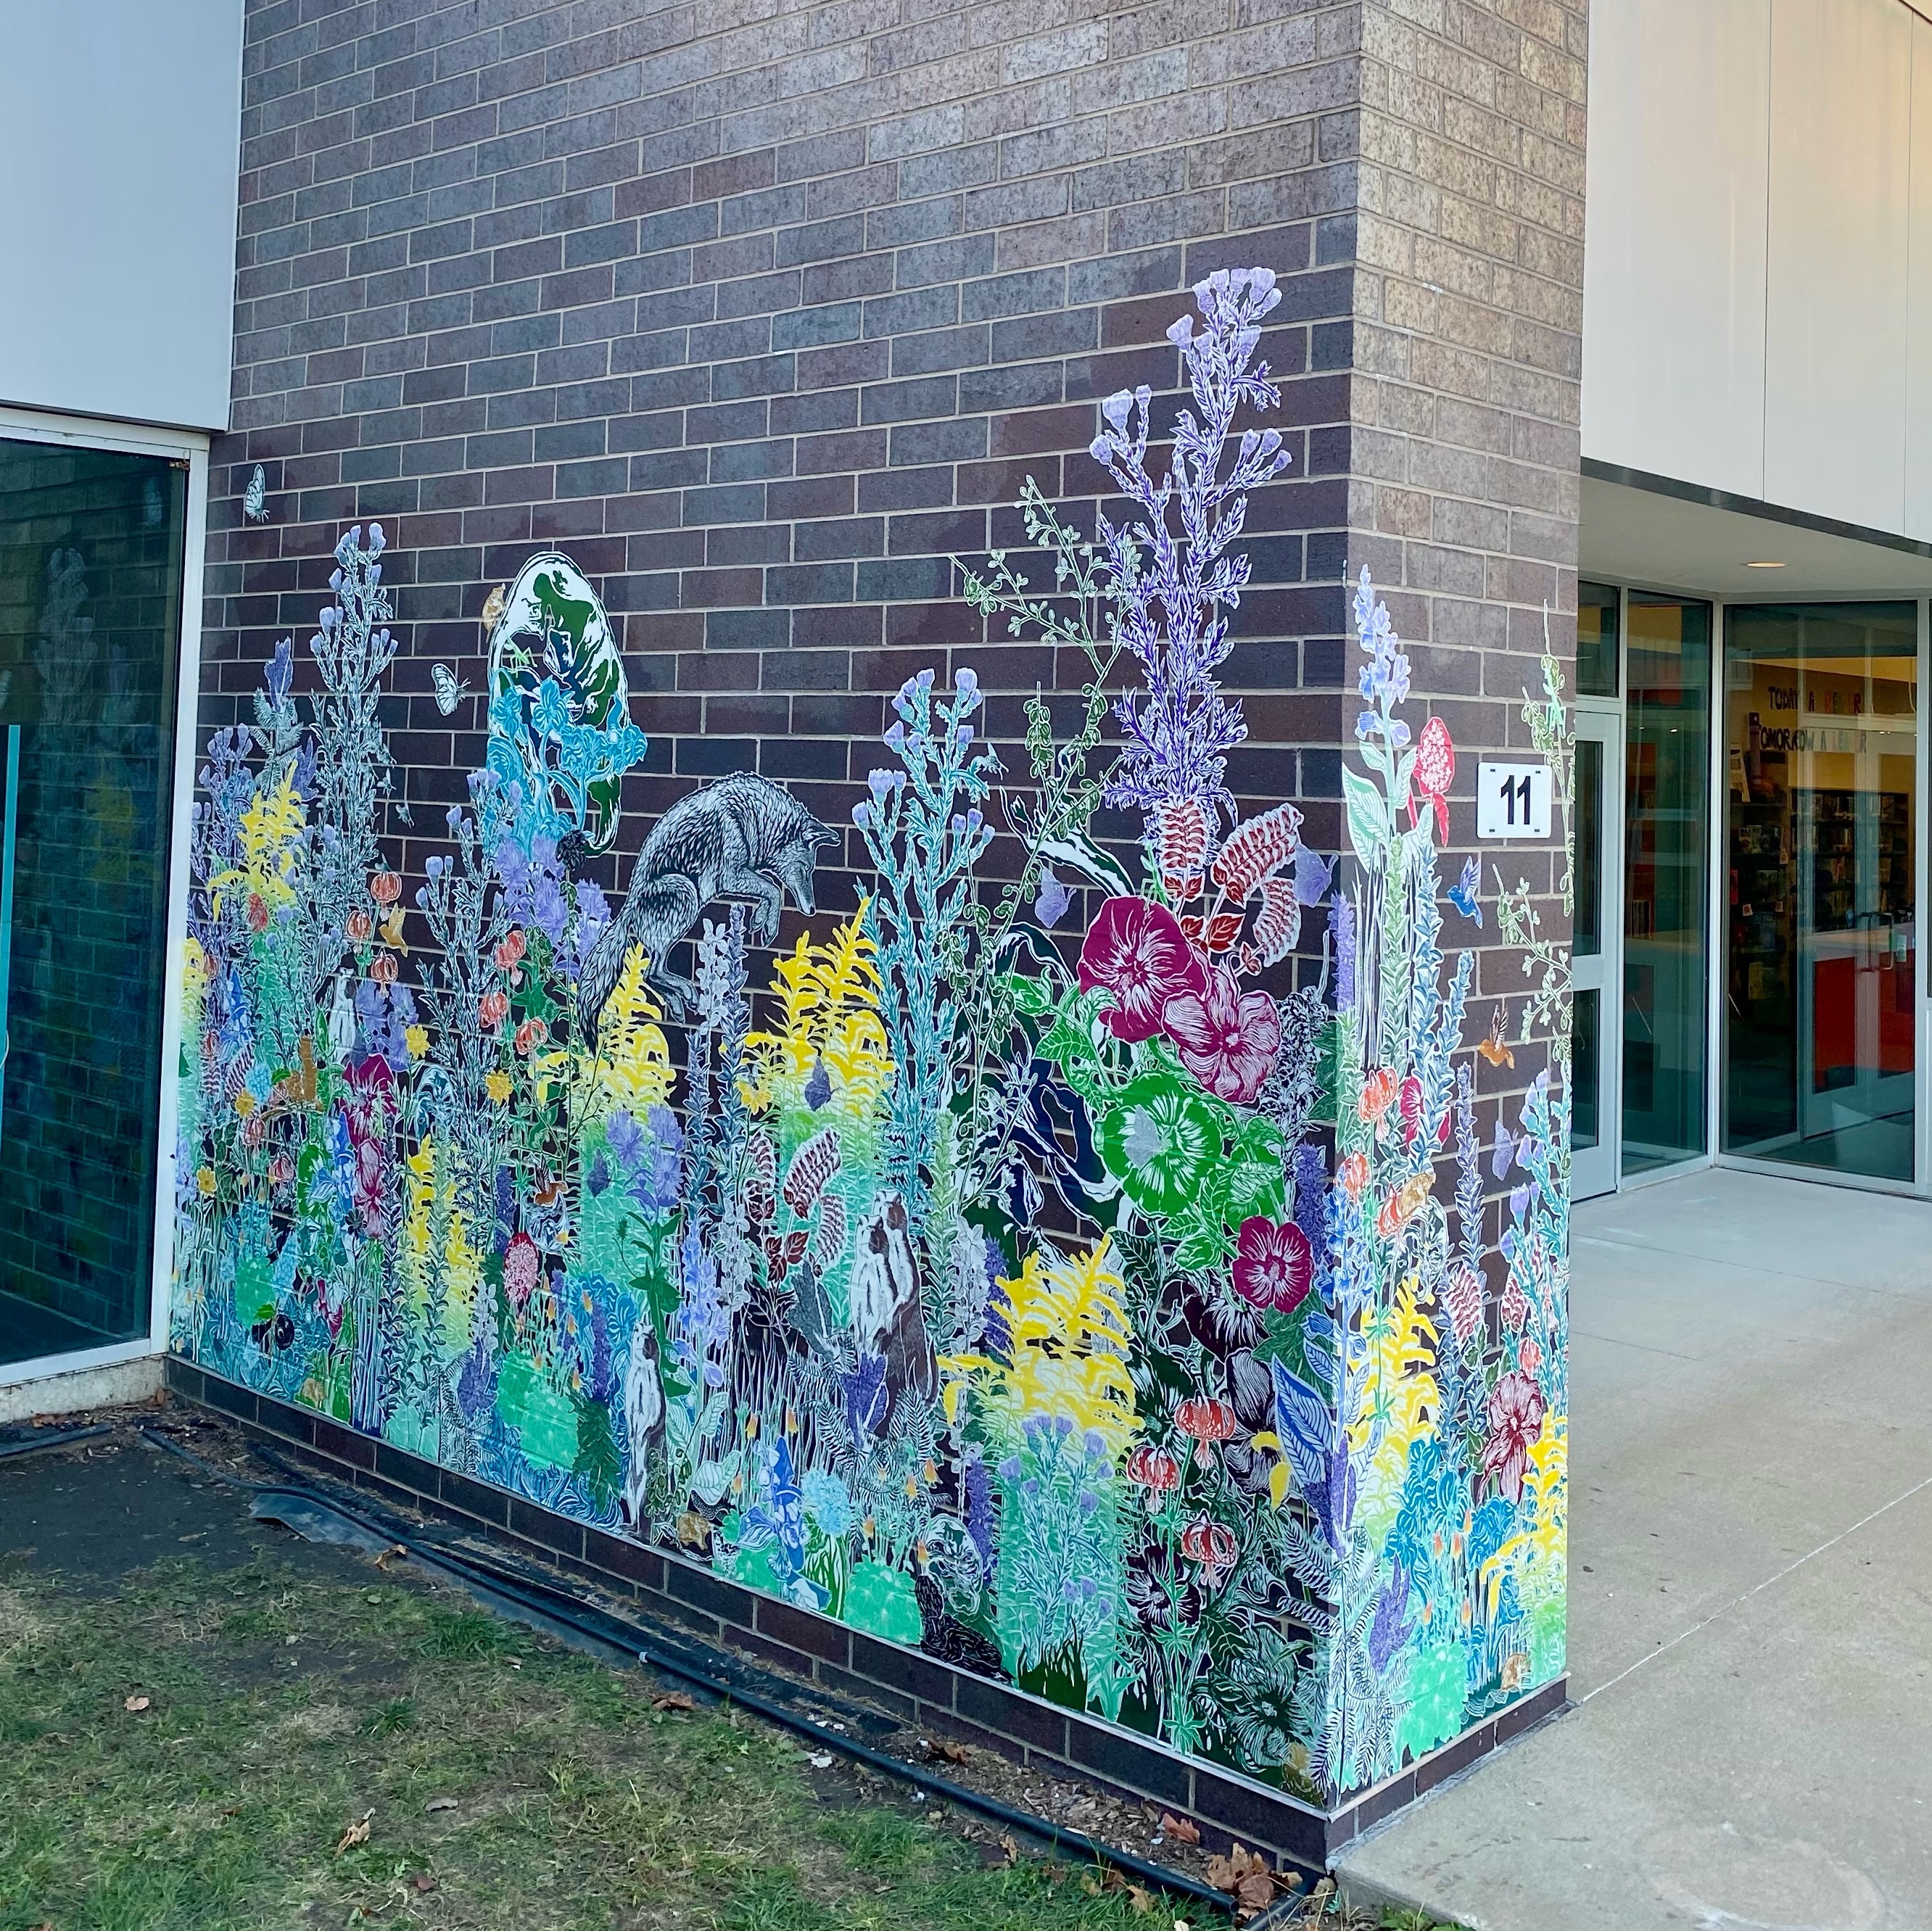 A colorful paste-up installation of various plants is on a brick wall at Carrie Busey Elementary school. The prinstallation wraps around the wall to the other side. Photo by Emmy Lingscheit.